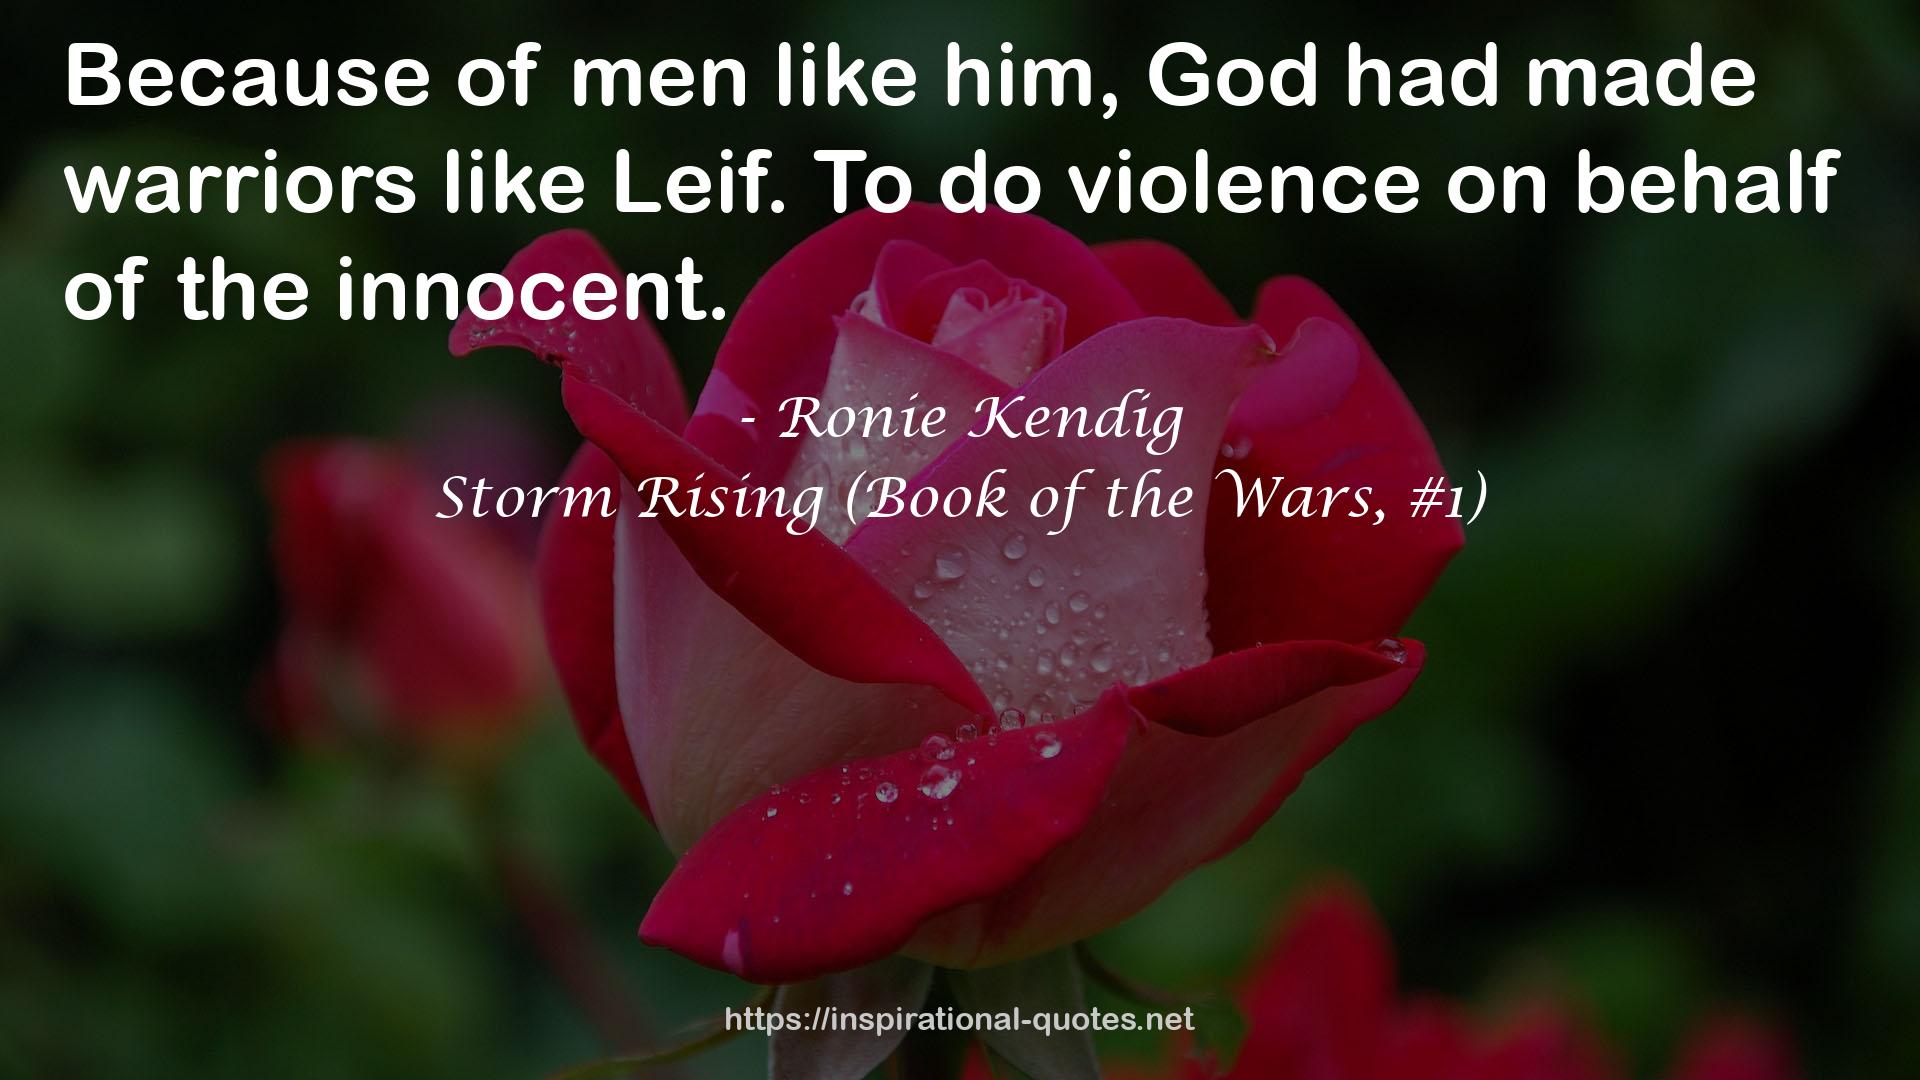 Storm Rising (Book of the Wars, #1) QUOTES